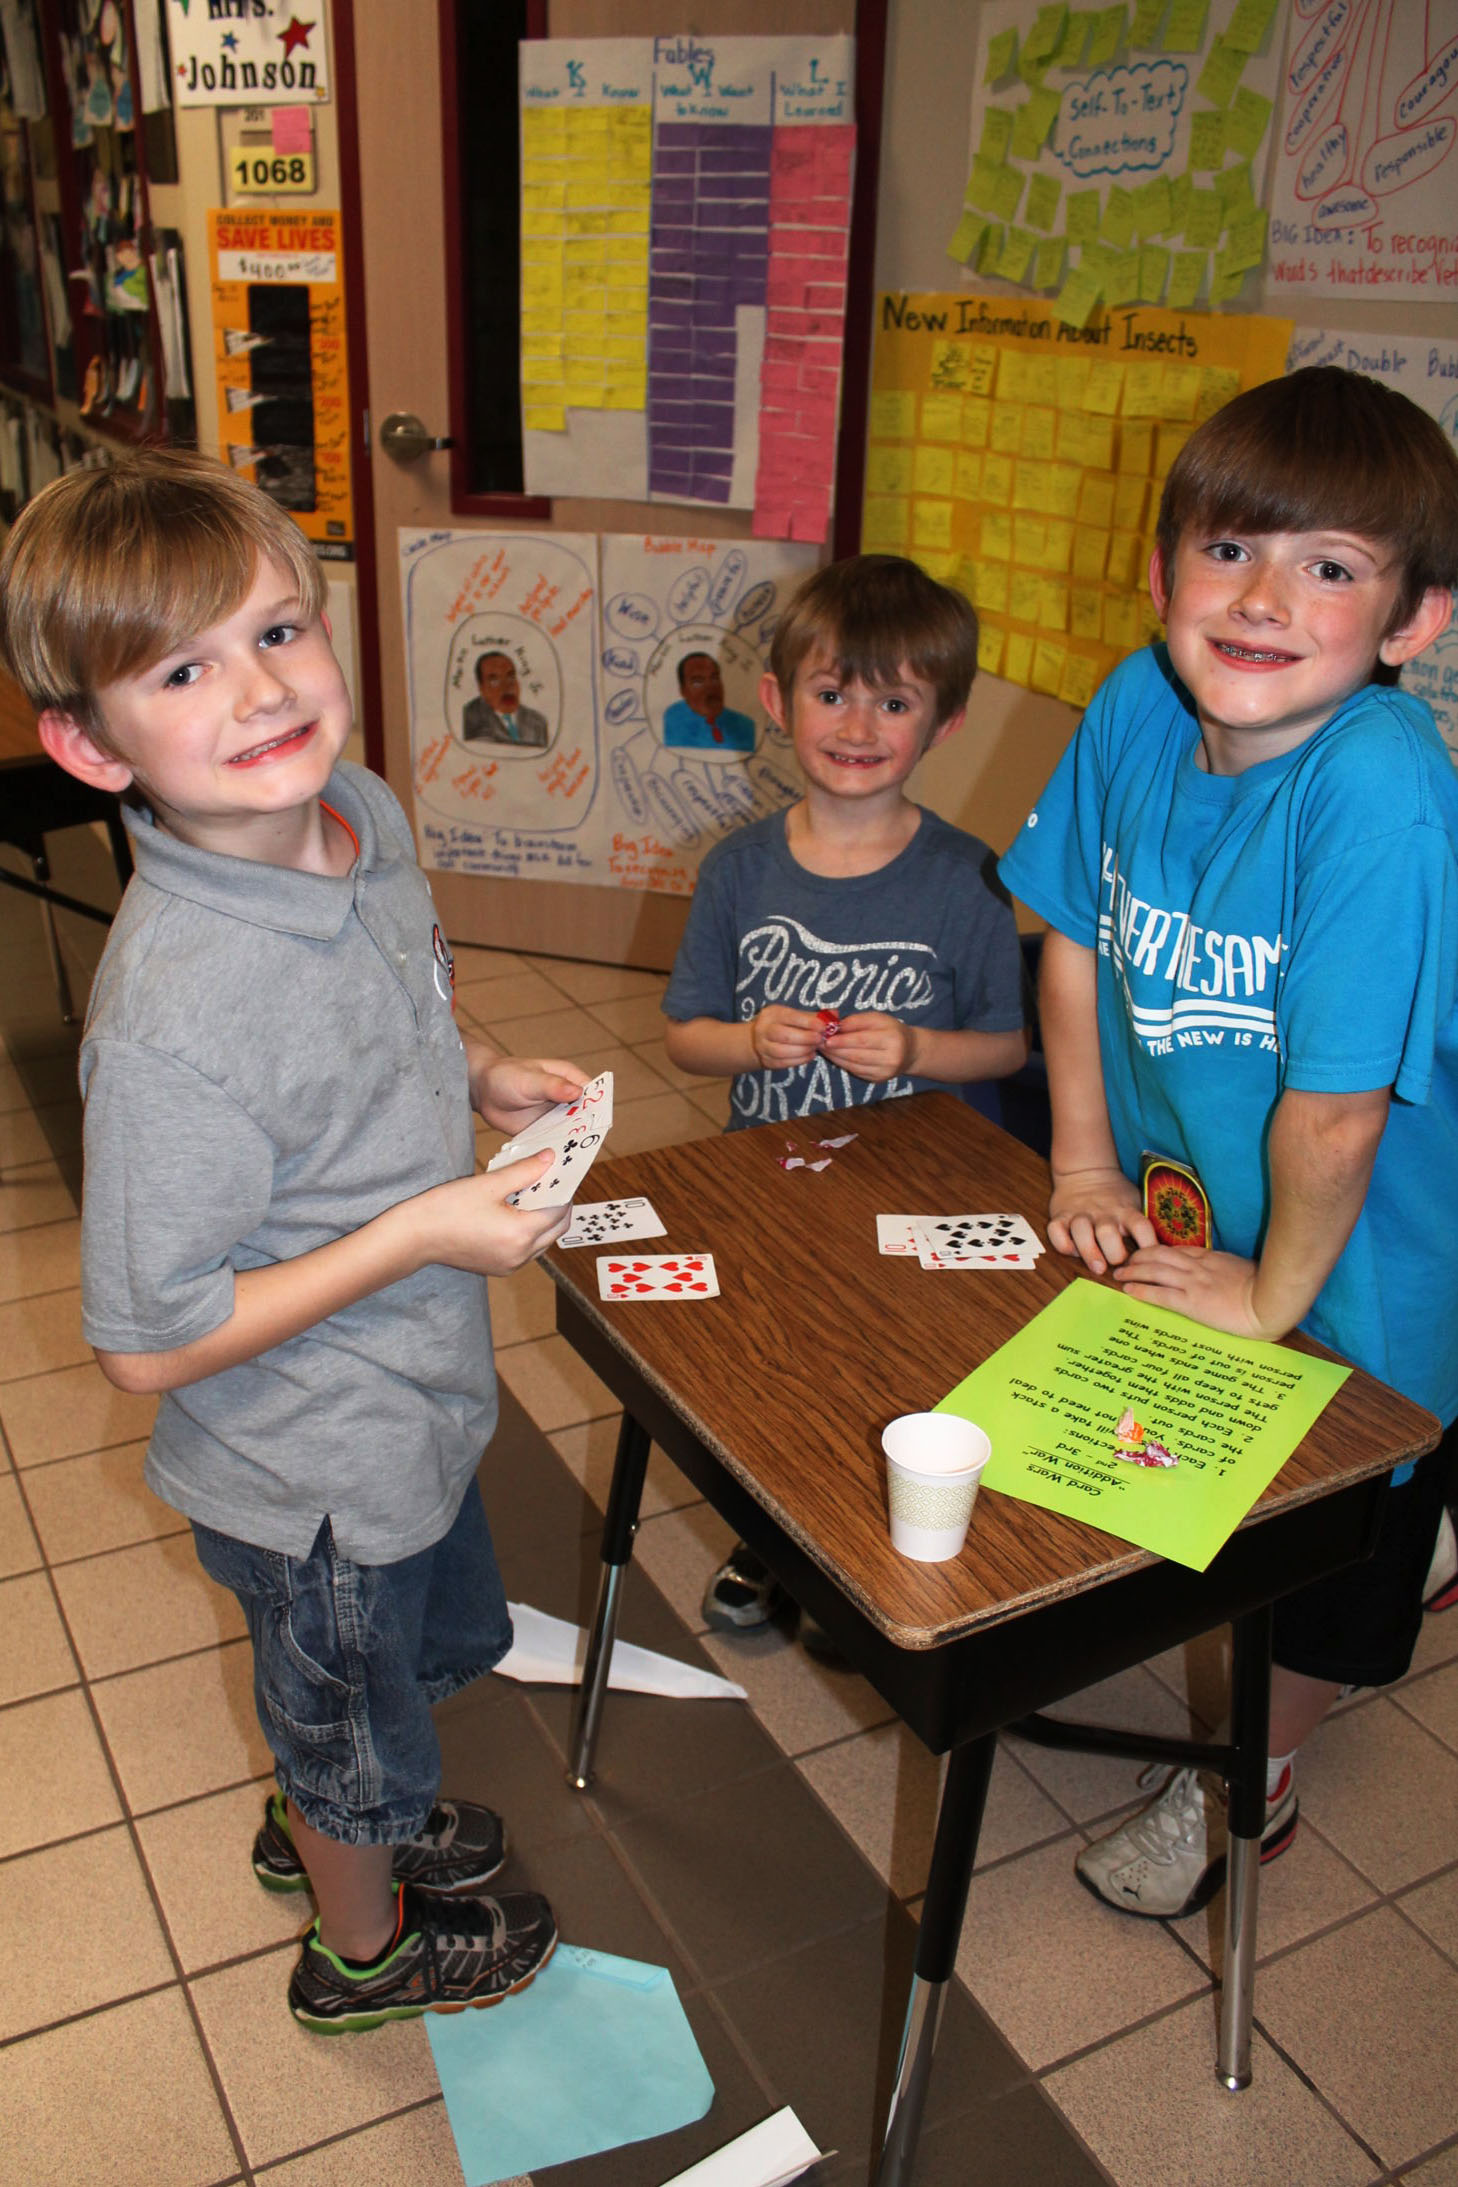 Students at Rice Elementary enjoyed participating in math/science night.